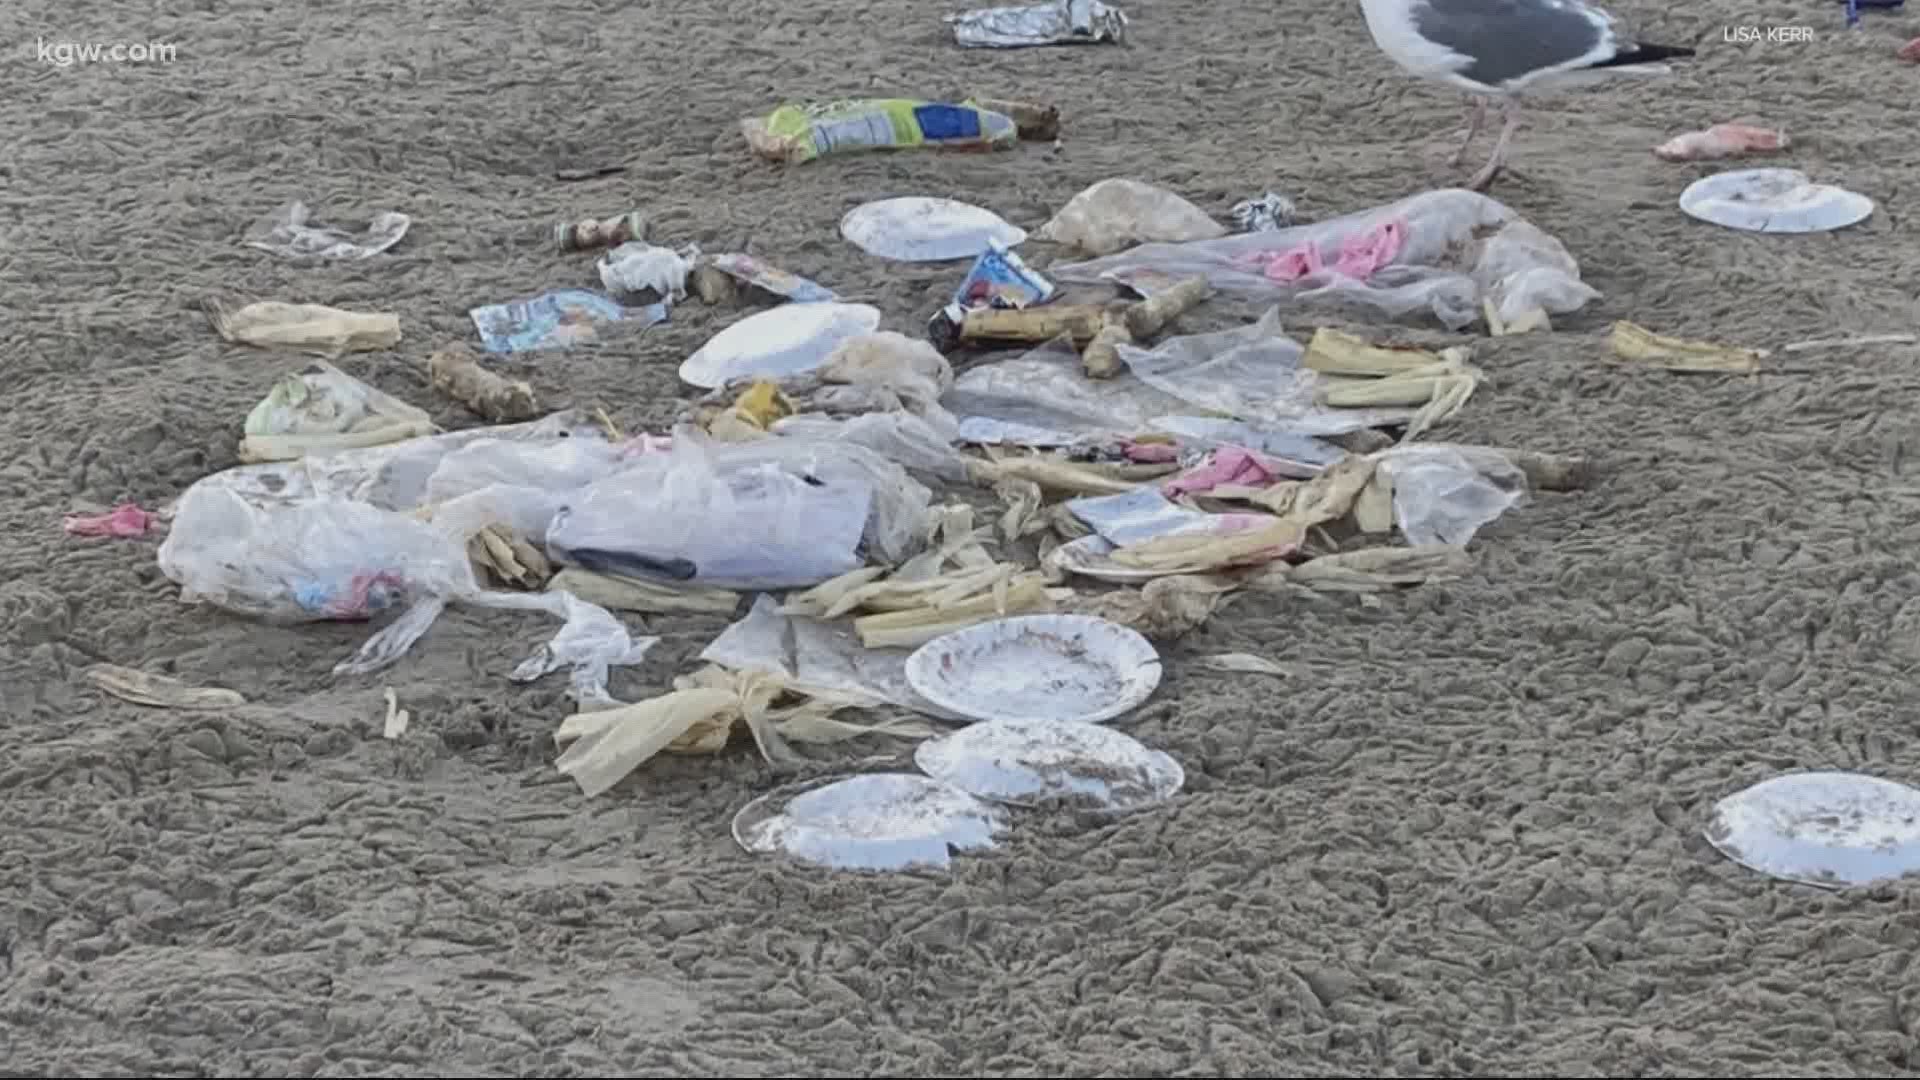 A record number of people are visiting Oregon beaches, but increasingly they're leaving their trash behind for locals to pick up.